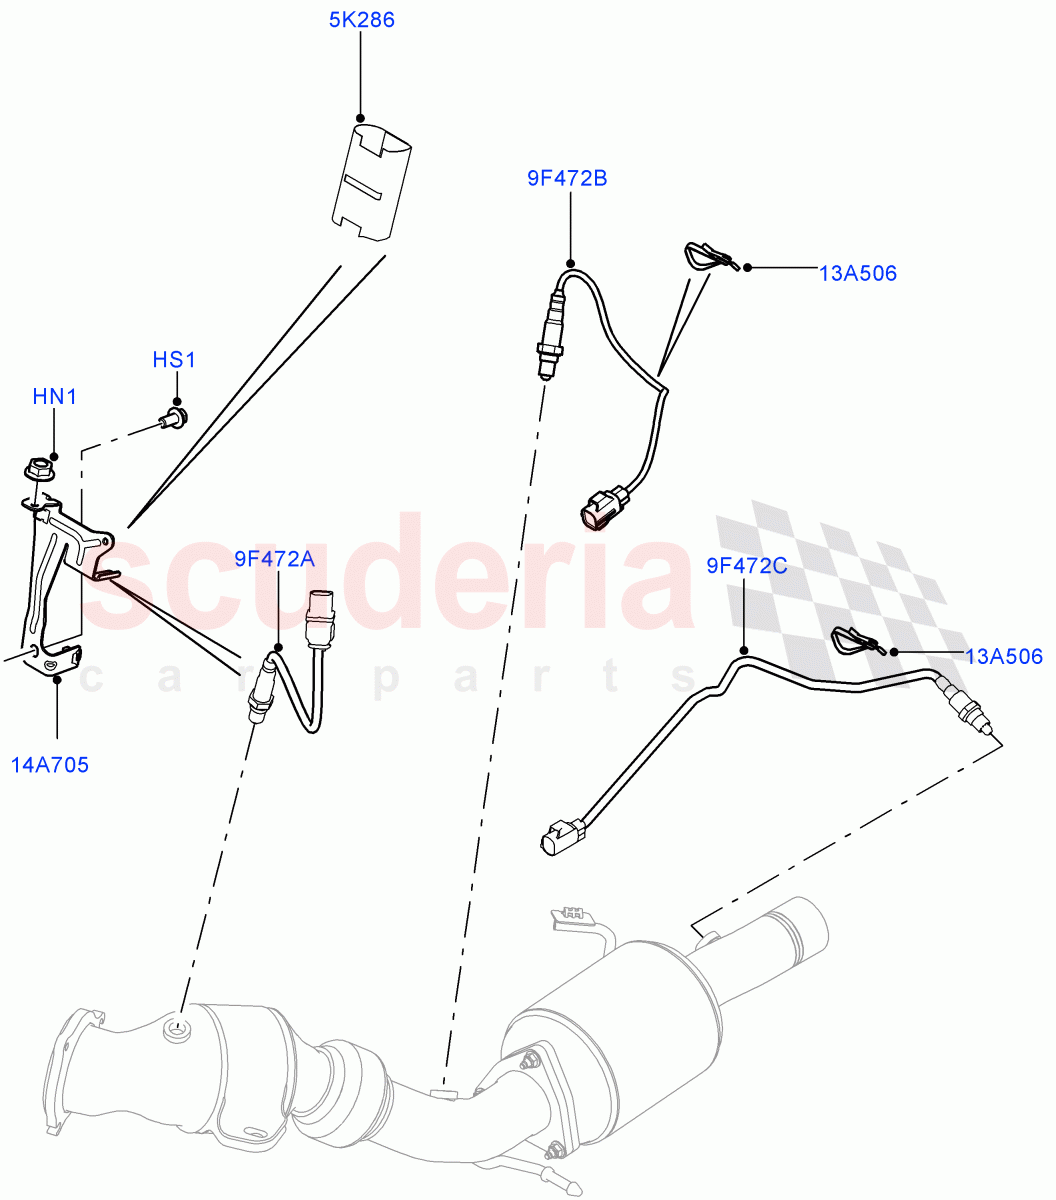 Exhaust System(Exhaust System Sensors)(2.0L 16V TIVCT T/C Gen2 Petrol,Halewood (UK)) of Land Rover Land Rover Discovery Sport (2015+) [2.0 Turbo Petrol GTDI]